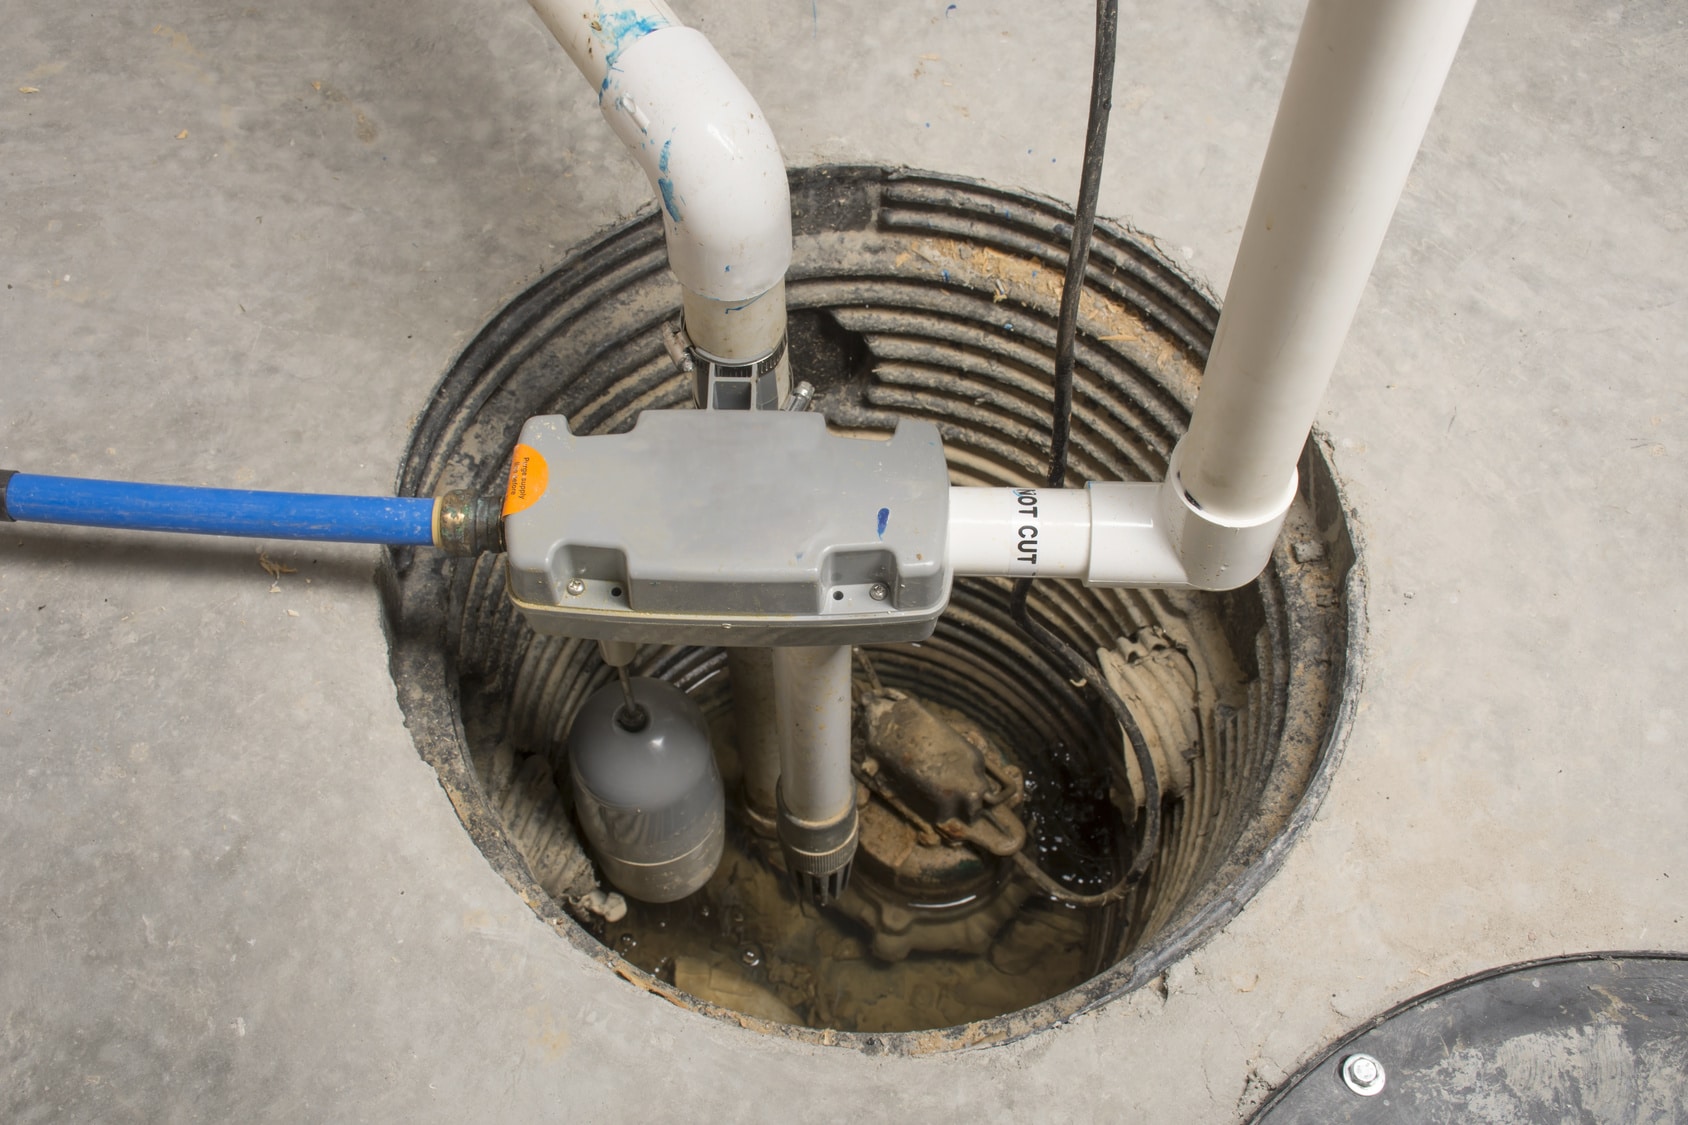 Common errors in the sump pump that you
should avoid